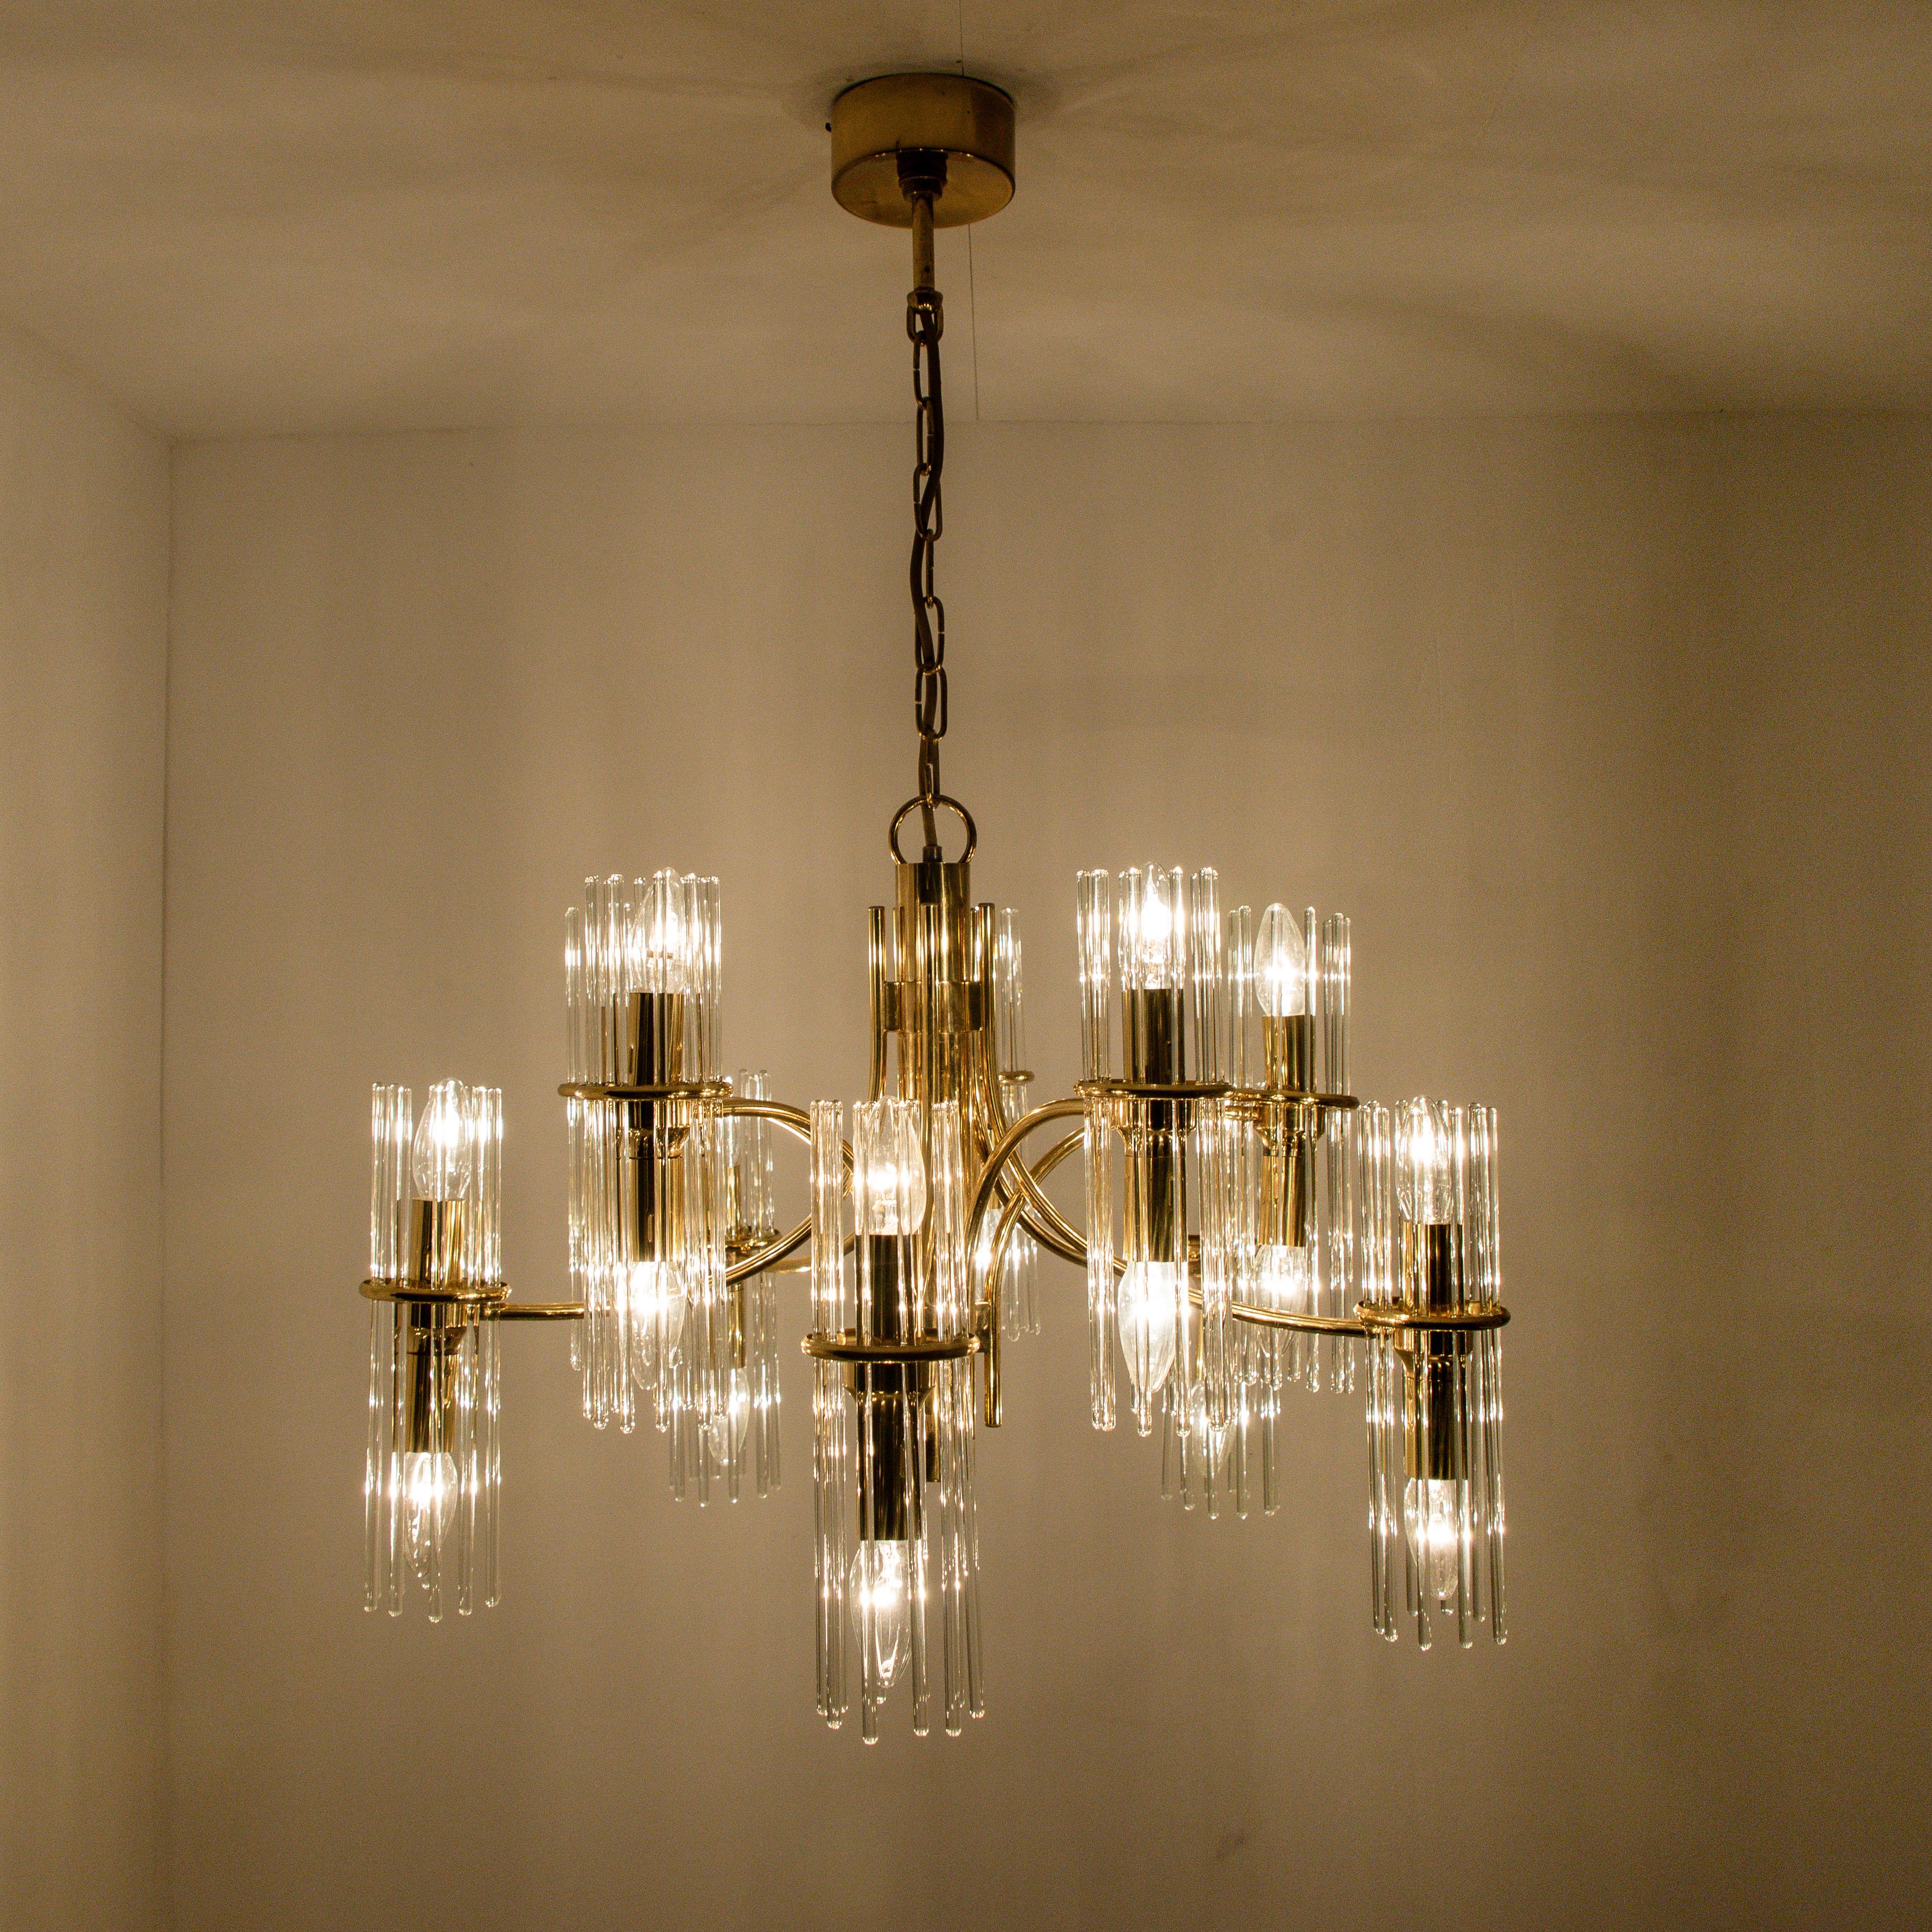 One Italian Mid-Century Modern glass rod and brass Gaetano Sciolari chandelier for Lightolier. Each 10-arm chandelier has 20-light bulbs, circa 1960s-1970s. Illuminates beautifully. The chain is removable and can be shortened or replaced with a